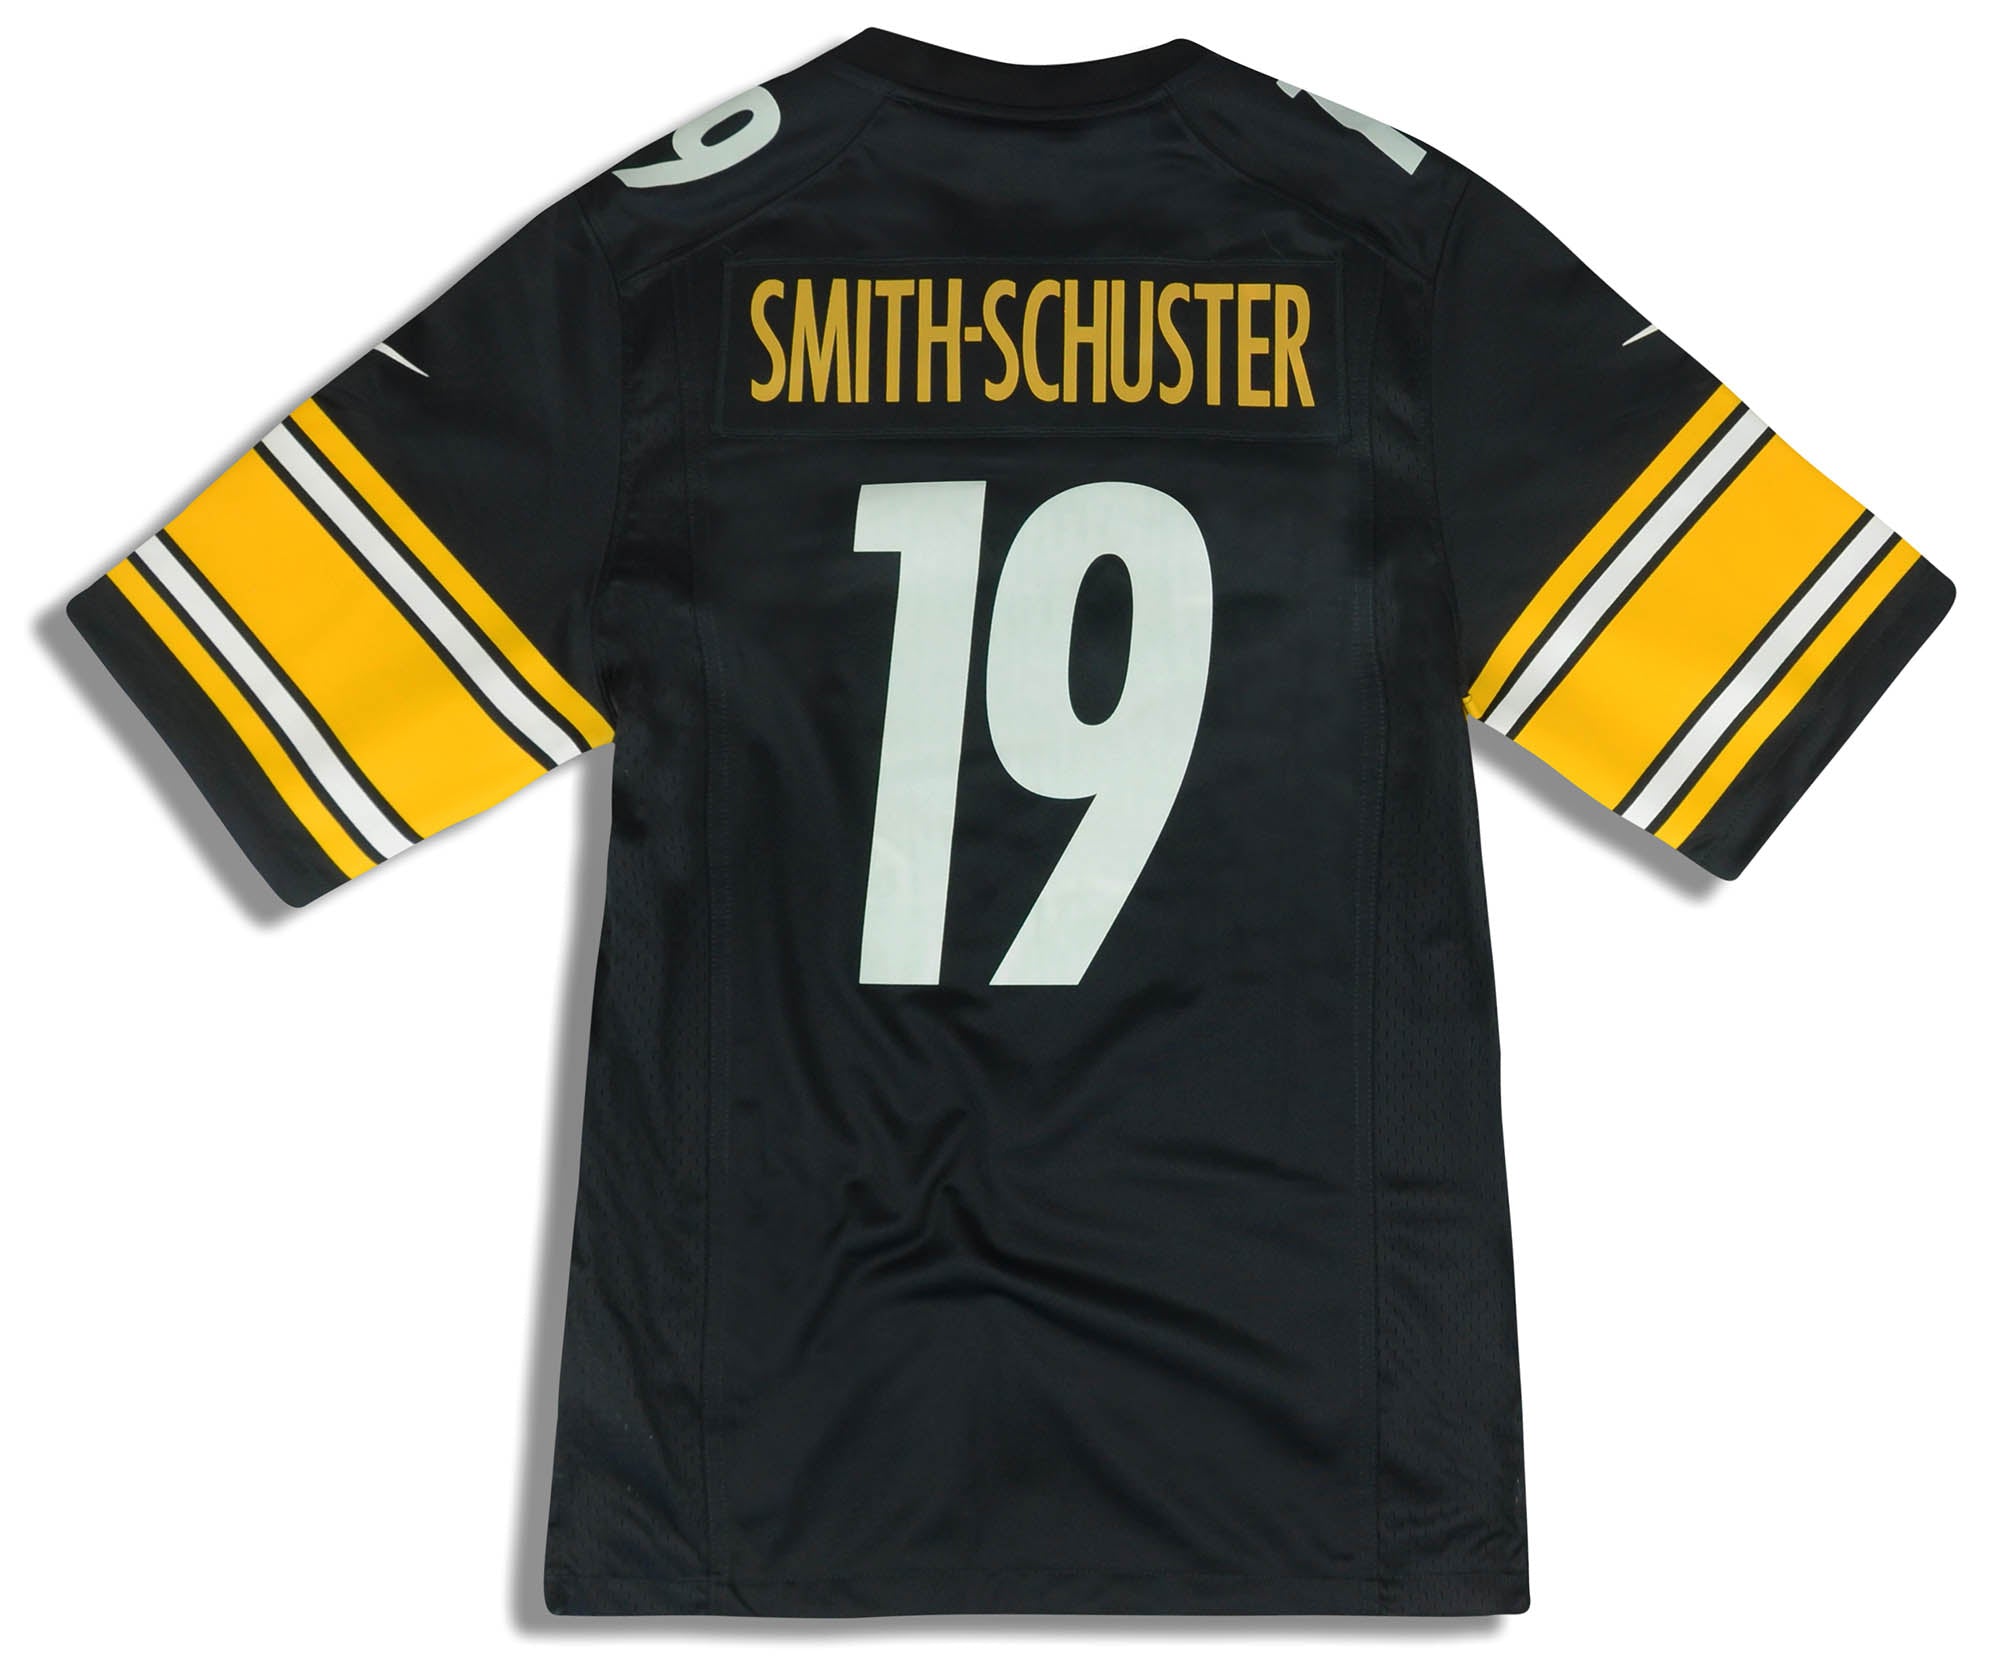 2018 PITTSBURGH STEELERS SMITH-SCHUSTER #19 NIKE GAME JERSEY (HOME) S - W/TAGS